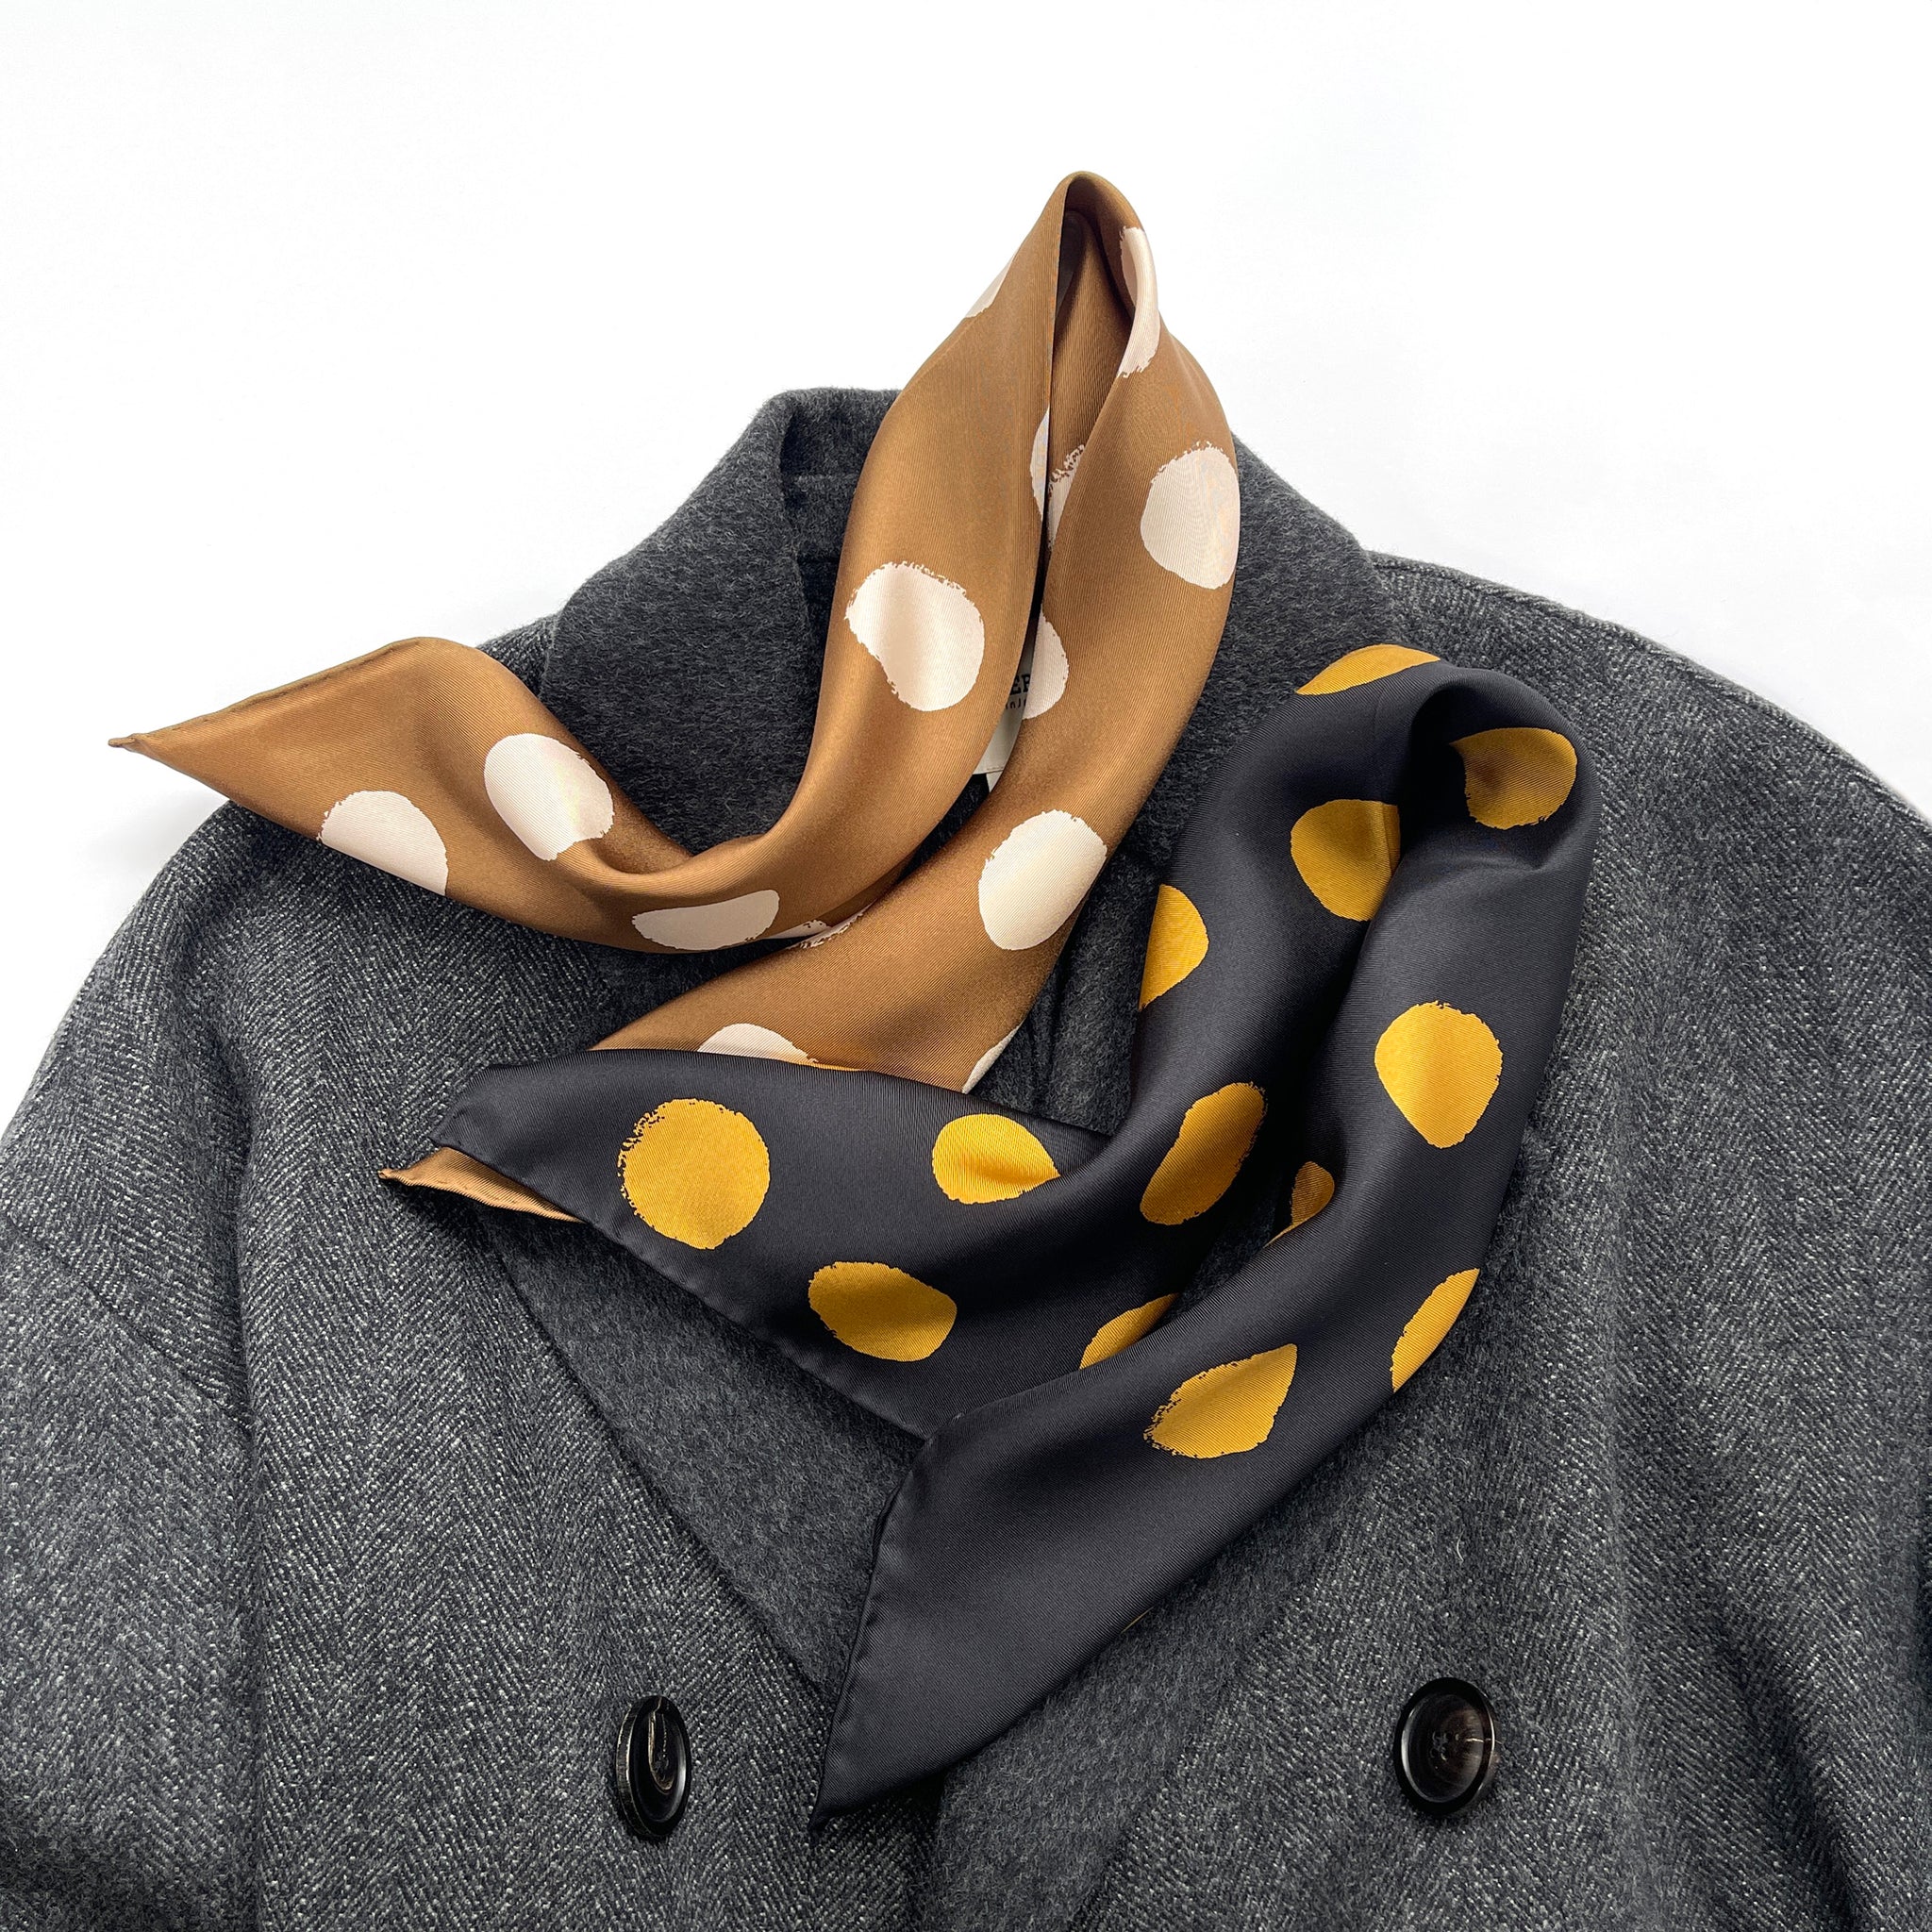 two polka dot print silk twill scarves in classic black and beige colours with hand-rolled hems laying on a dark grey wool coat